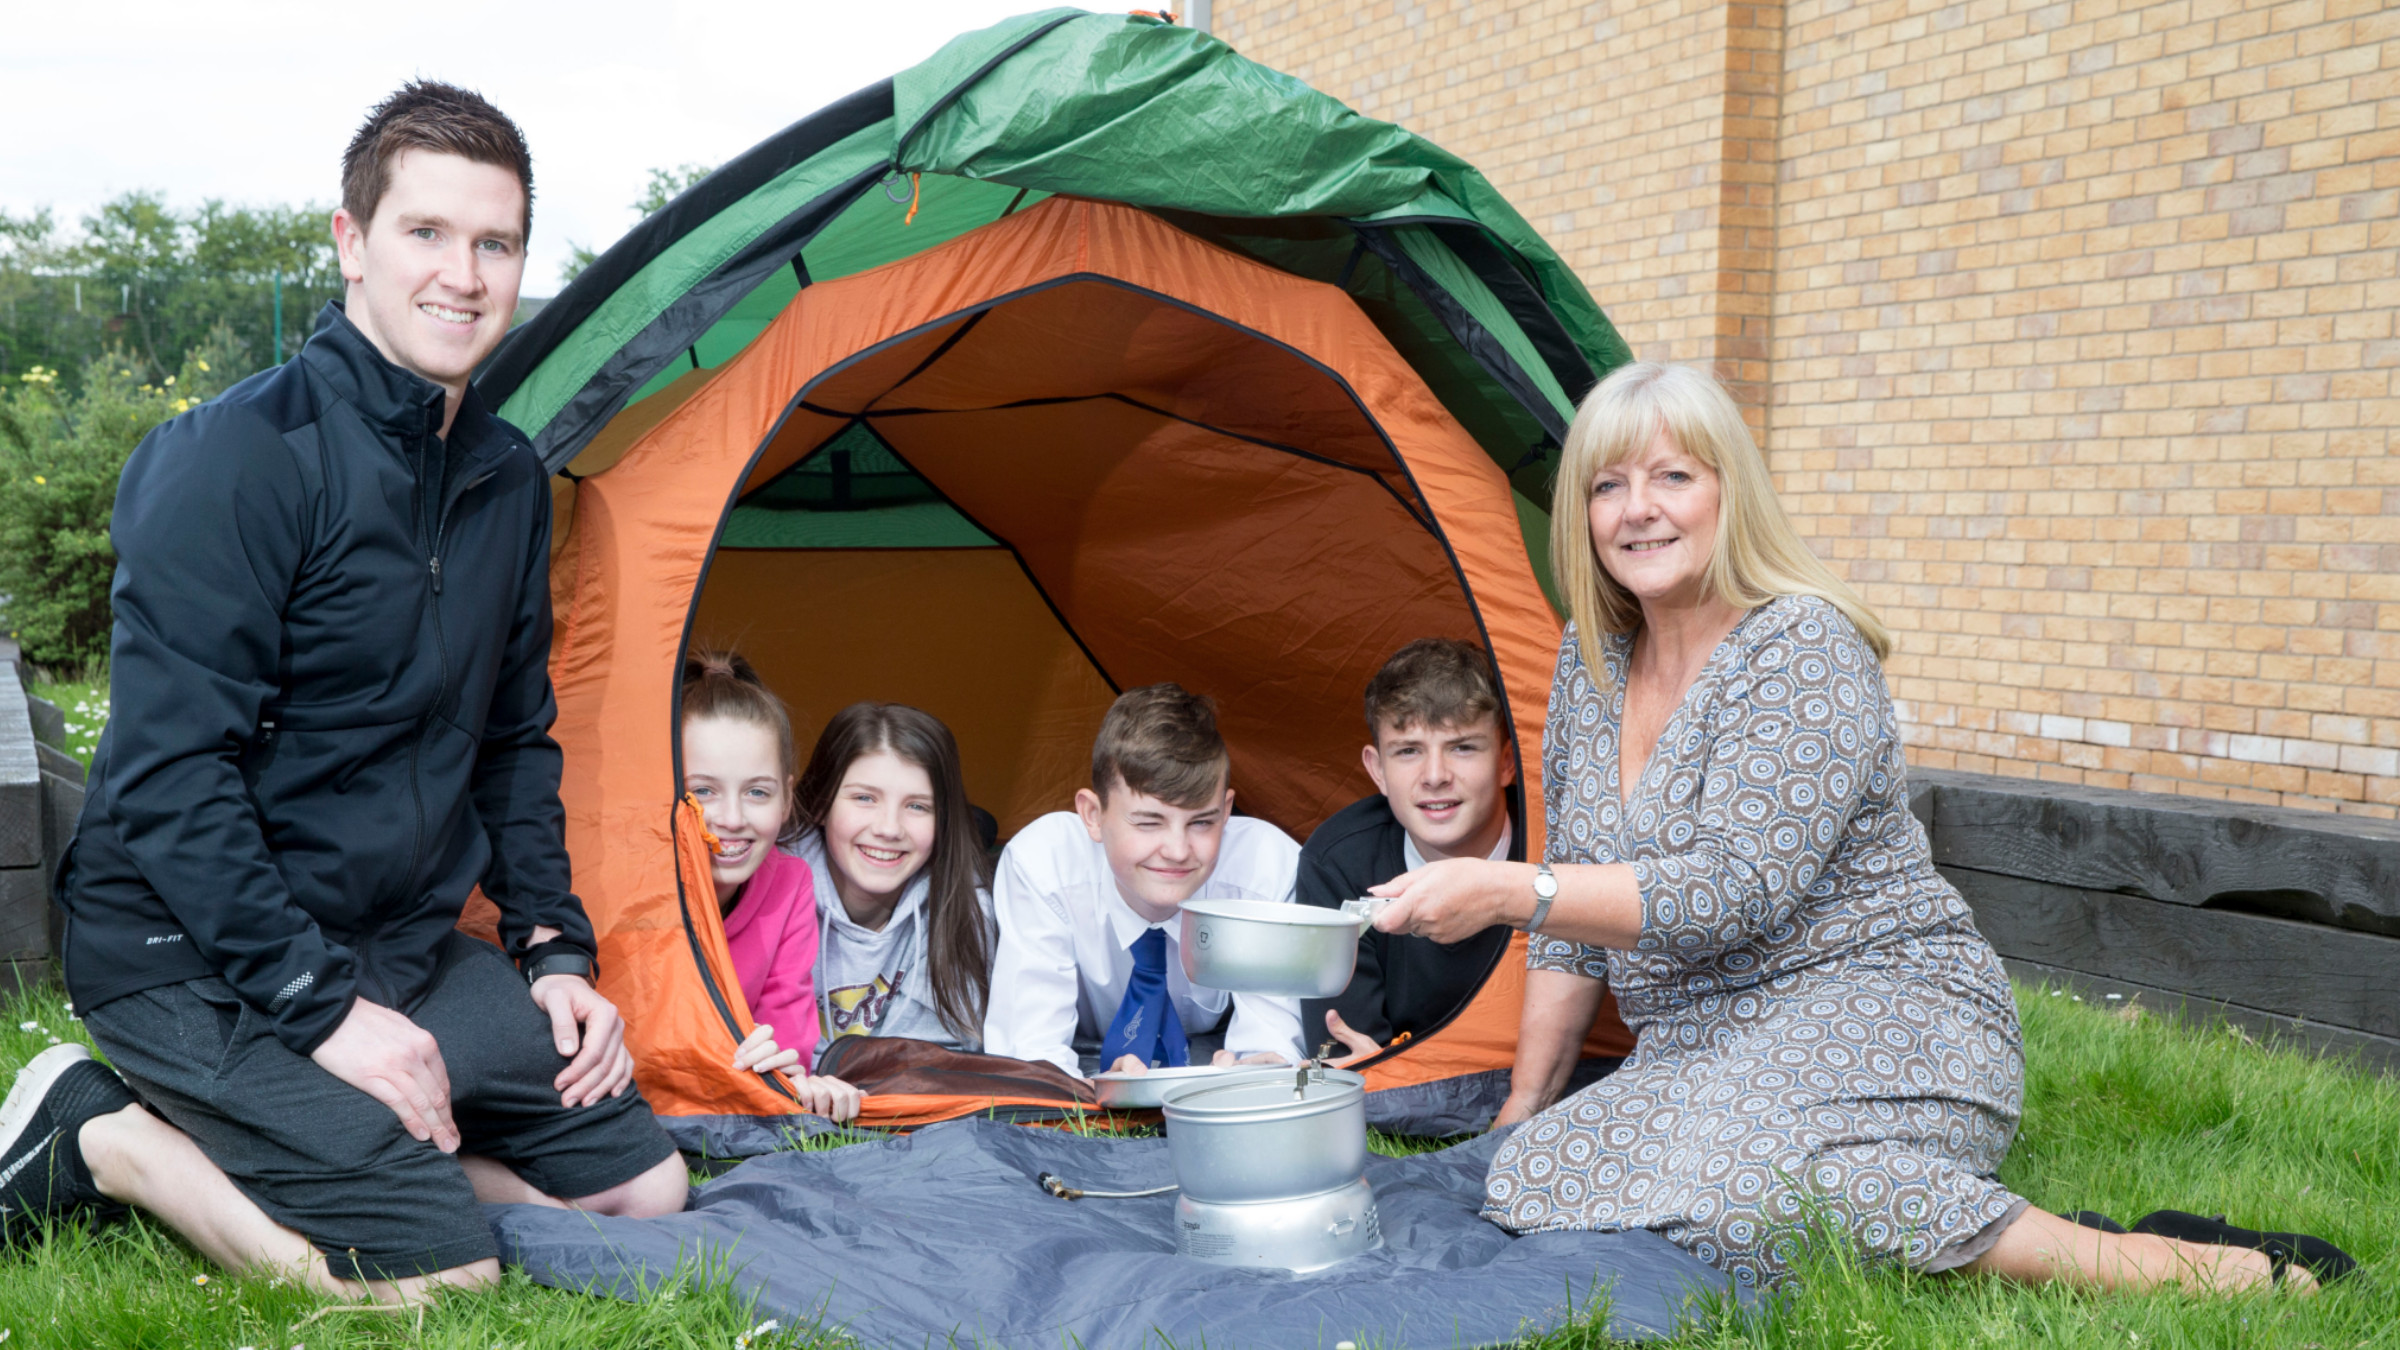 Anne Clyde UKSE and Craig Strachan with four Duke of Edinburgh pupils in a tent using a camp stove